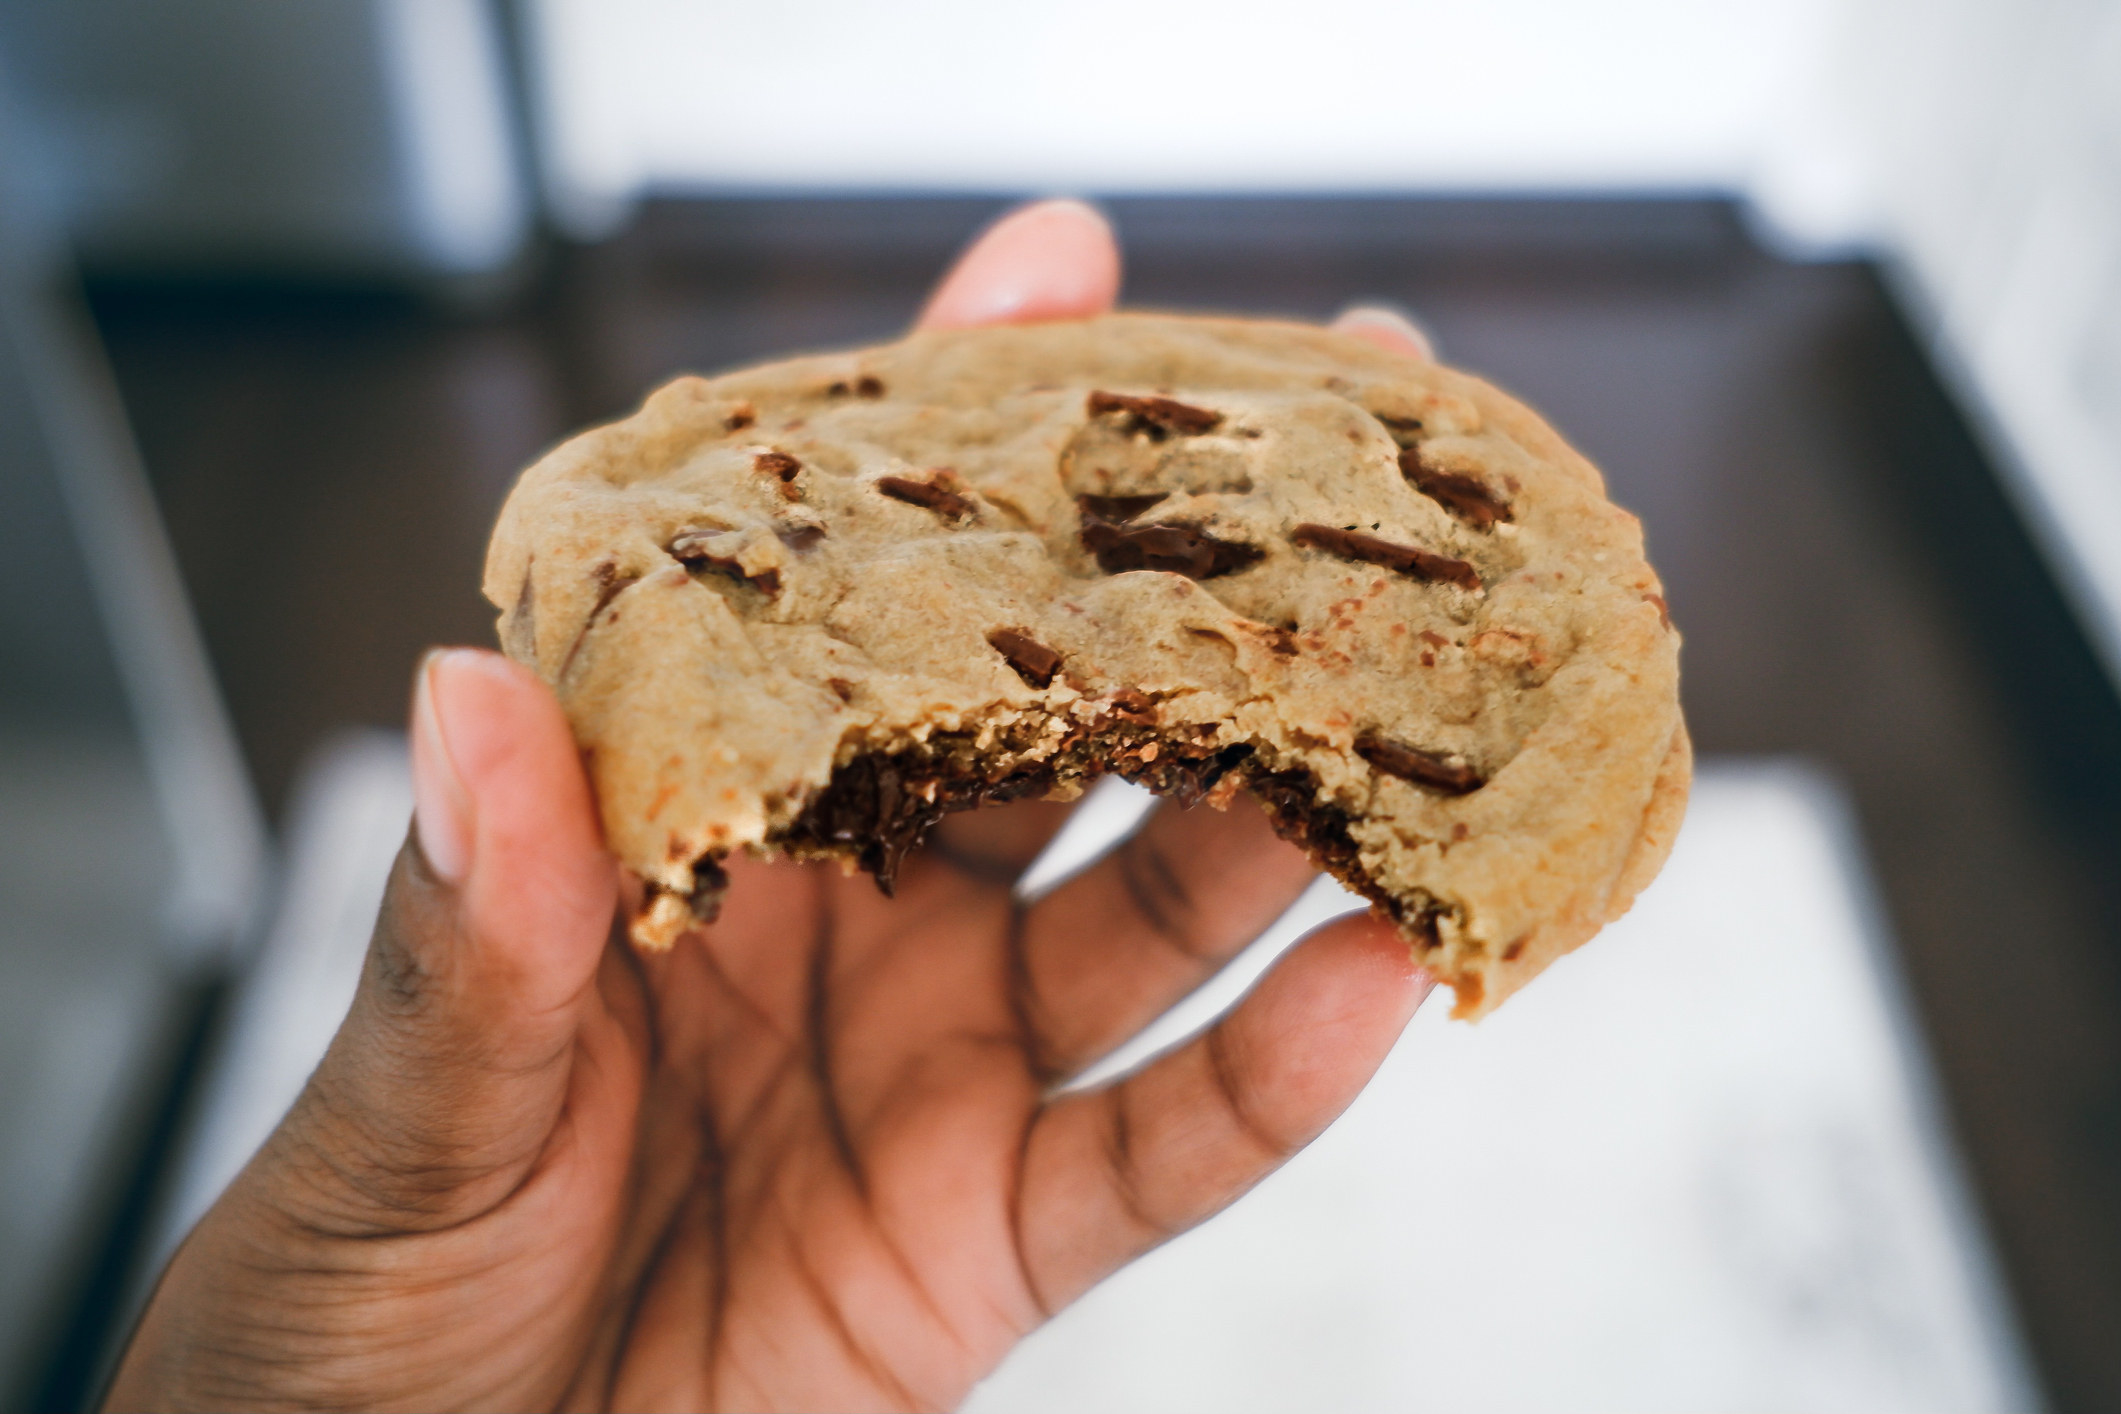 A woman holding a partially eaten chocolate chip cookie.